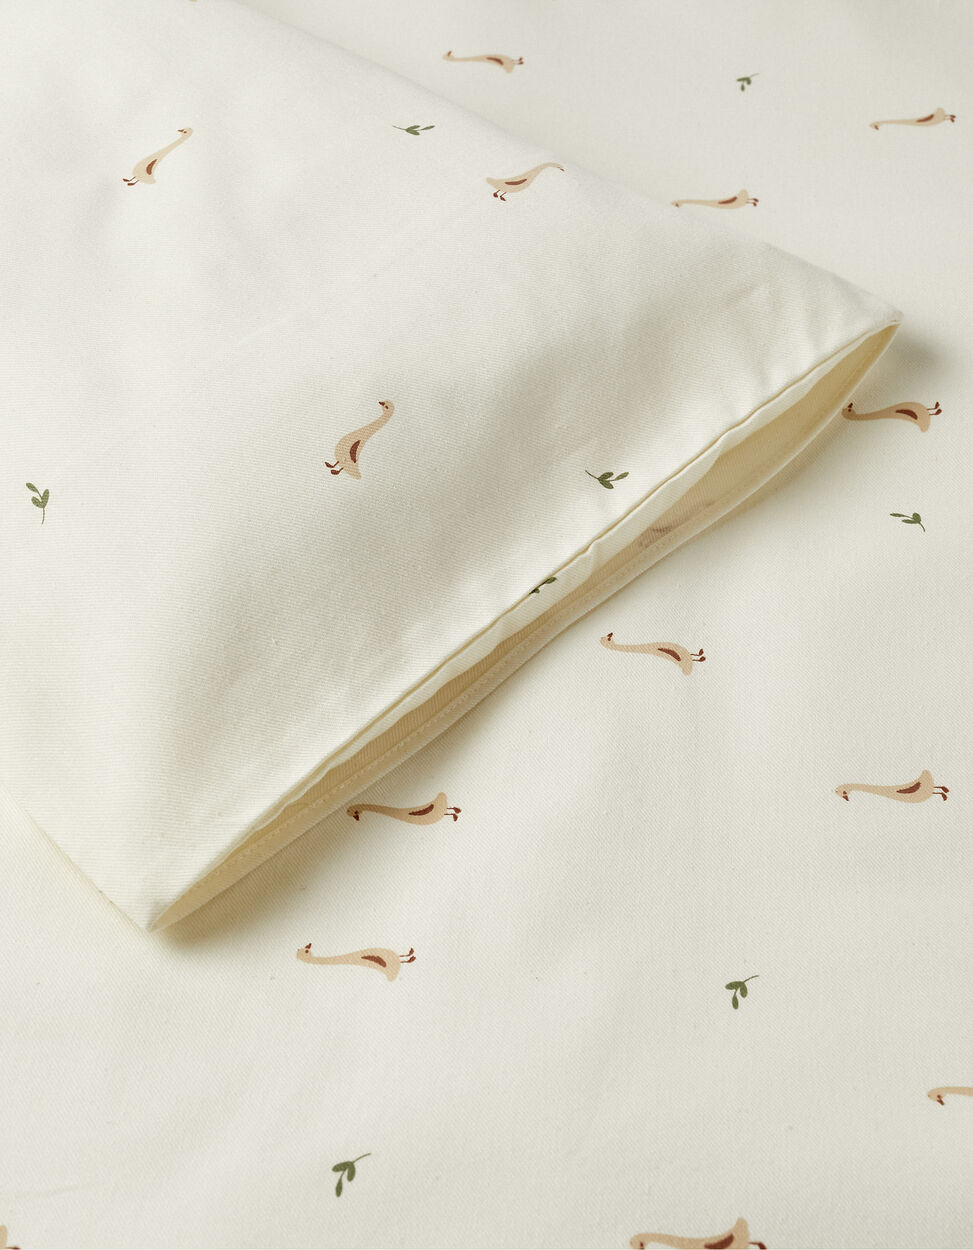 Duvet Cover, Filling and Pillowcase Gloop! for Bed 60X120Cm, Farm